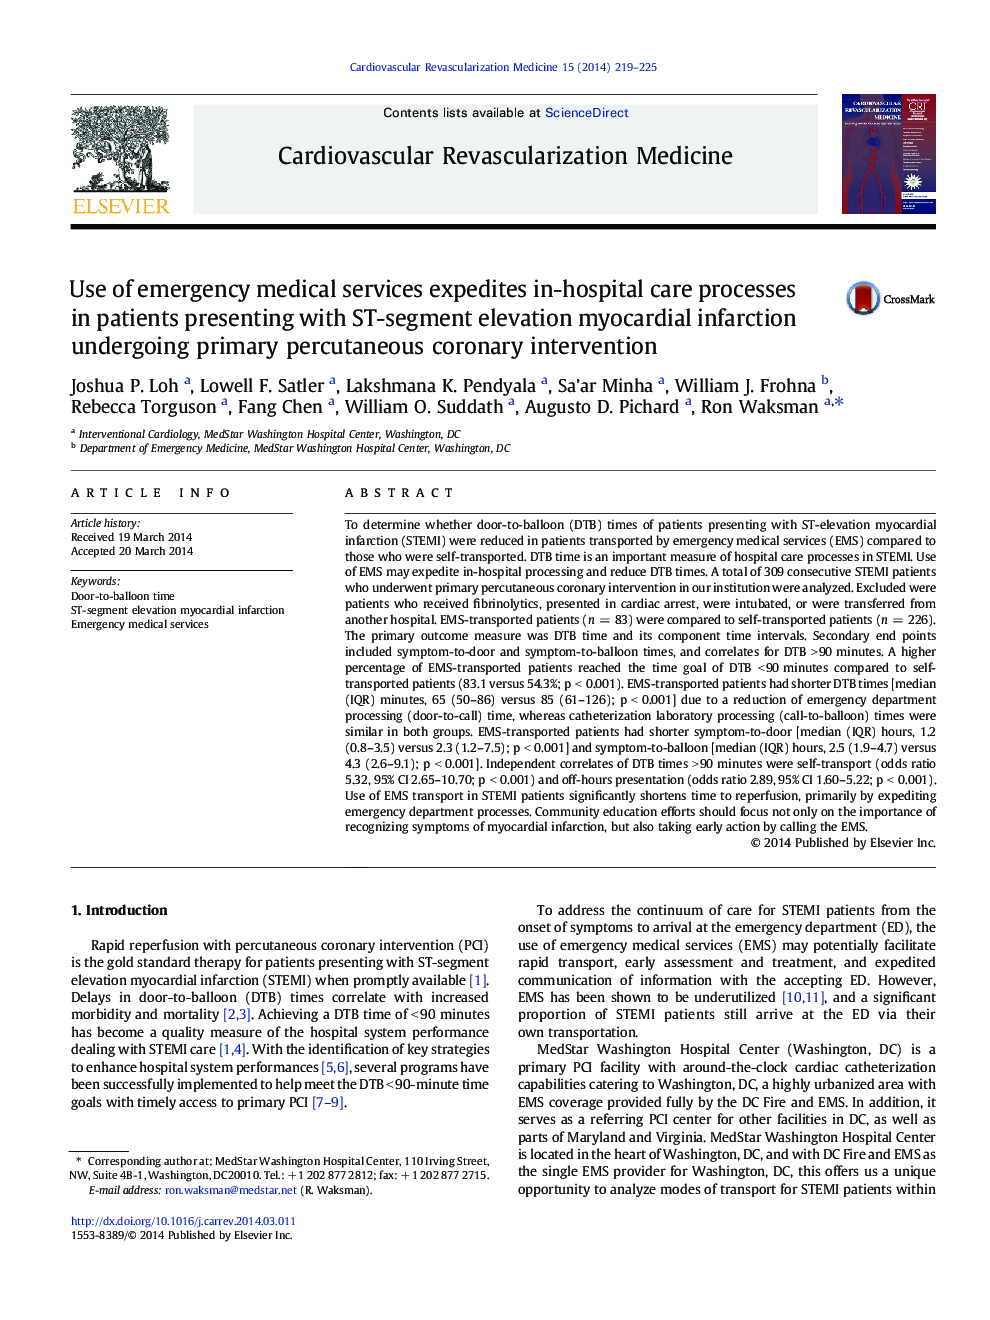 Use of emergency medical services expedites in-hospital care processes in patients presenting with ST-segment elevation myocardial infarction undergoing primary percutaneous coronary intervention